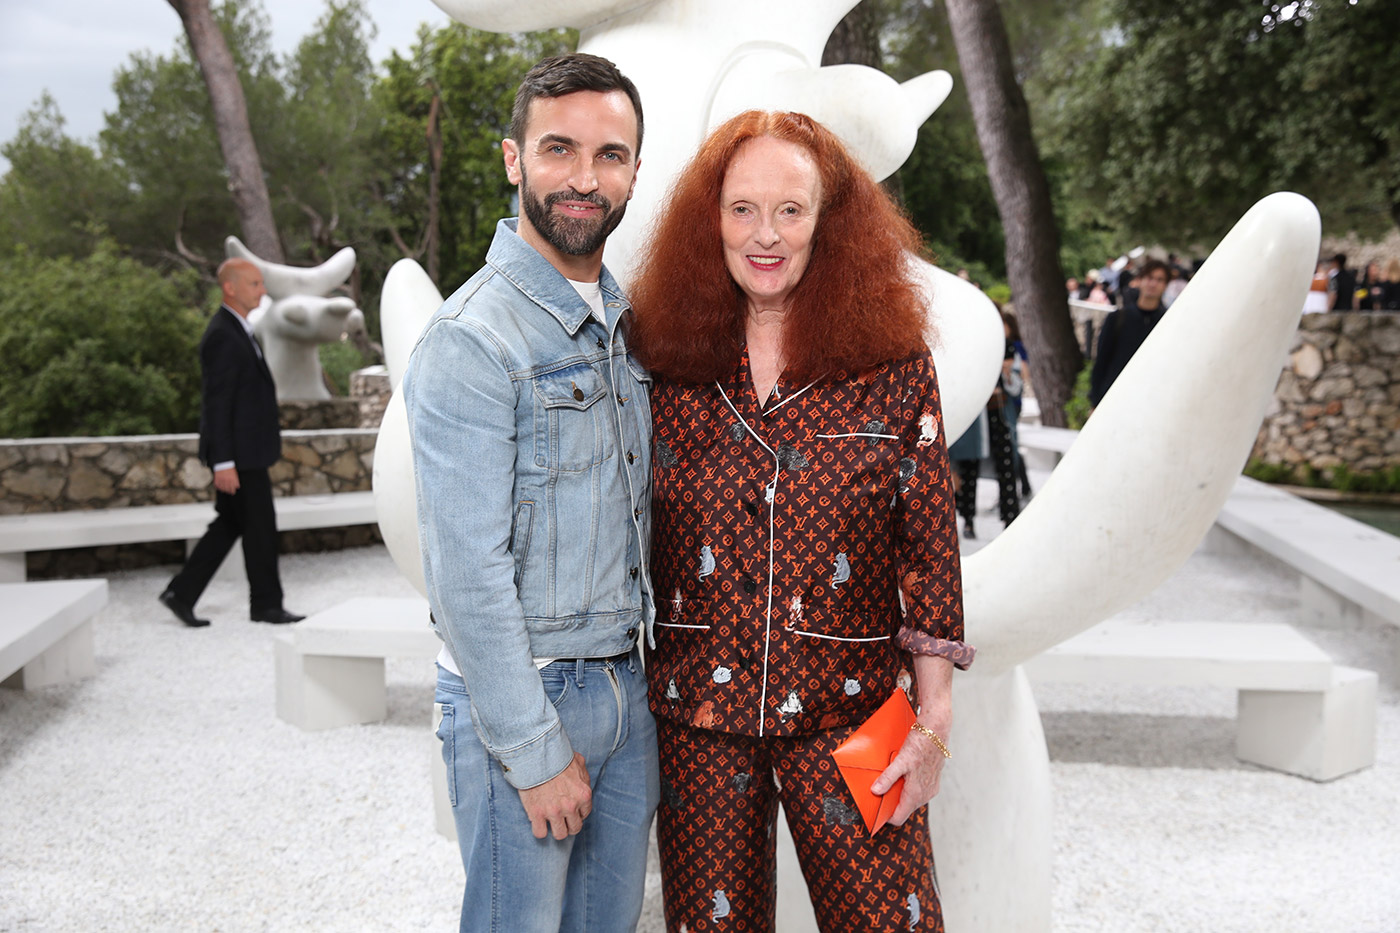 Louis Vuitton to present Cruise 2019 collection at the Maeght foundation